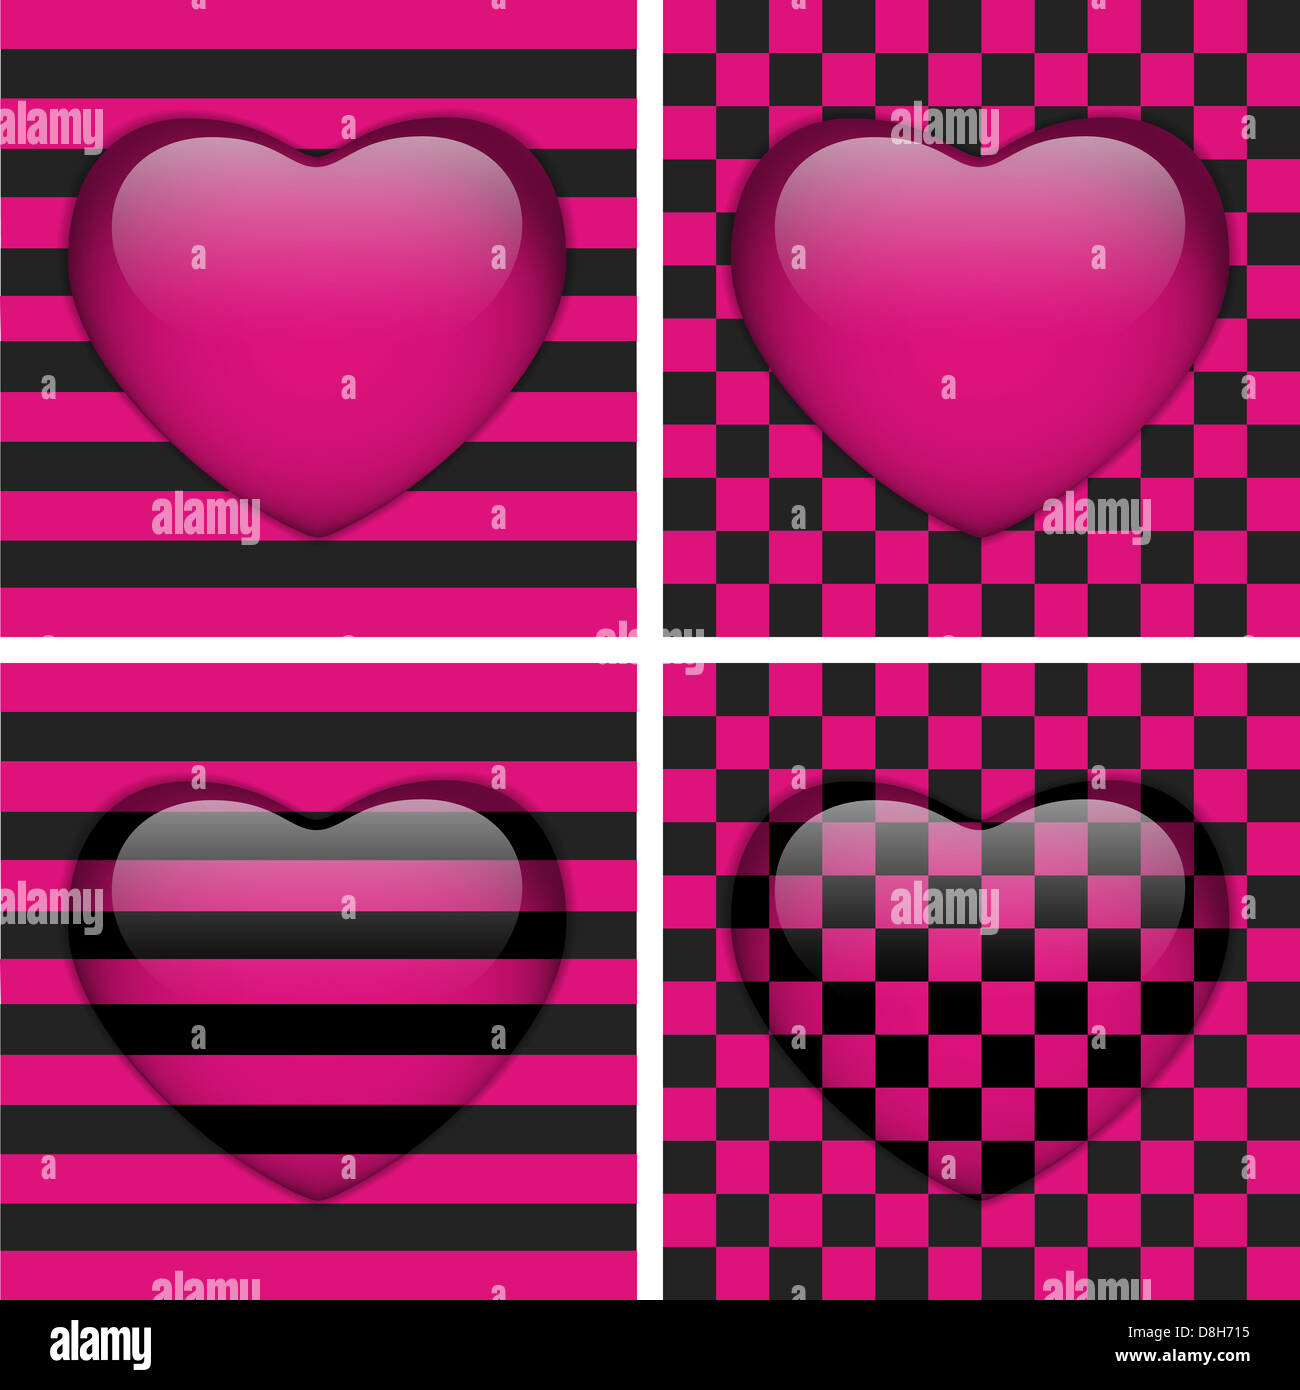 Vector - Set of Four Glossy Emo Hearts. Pink and Black Chess and Stripes Stock Photo